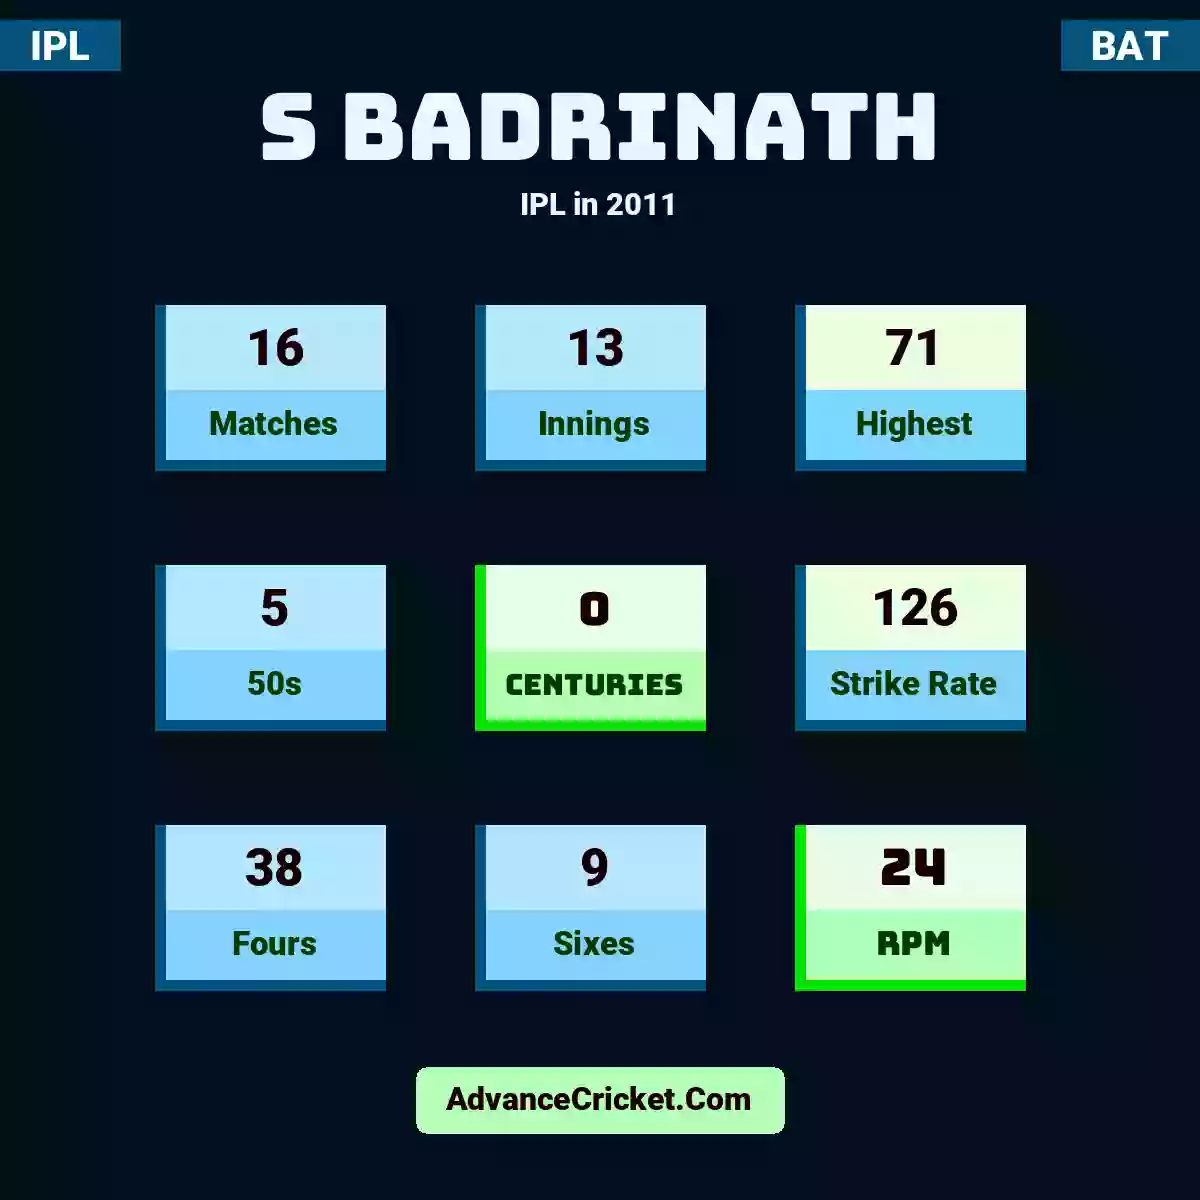 S Badrinath IPL  in 2011, S Badrinath played 16 matches, scored 71 runs as highest, 5 half-centuries, and 0 centuries, with a strike rate of 126. S.Badrinath hit 38 fours and 9 sixes, with an RPM of 24.